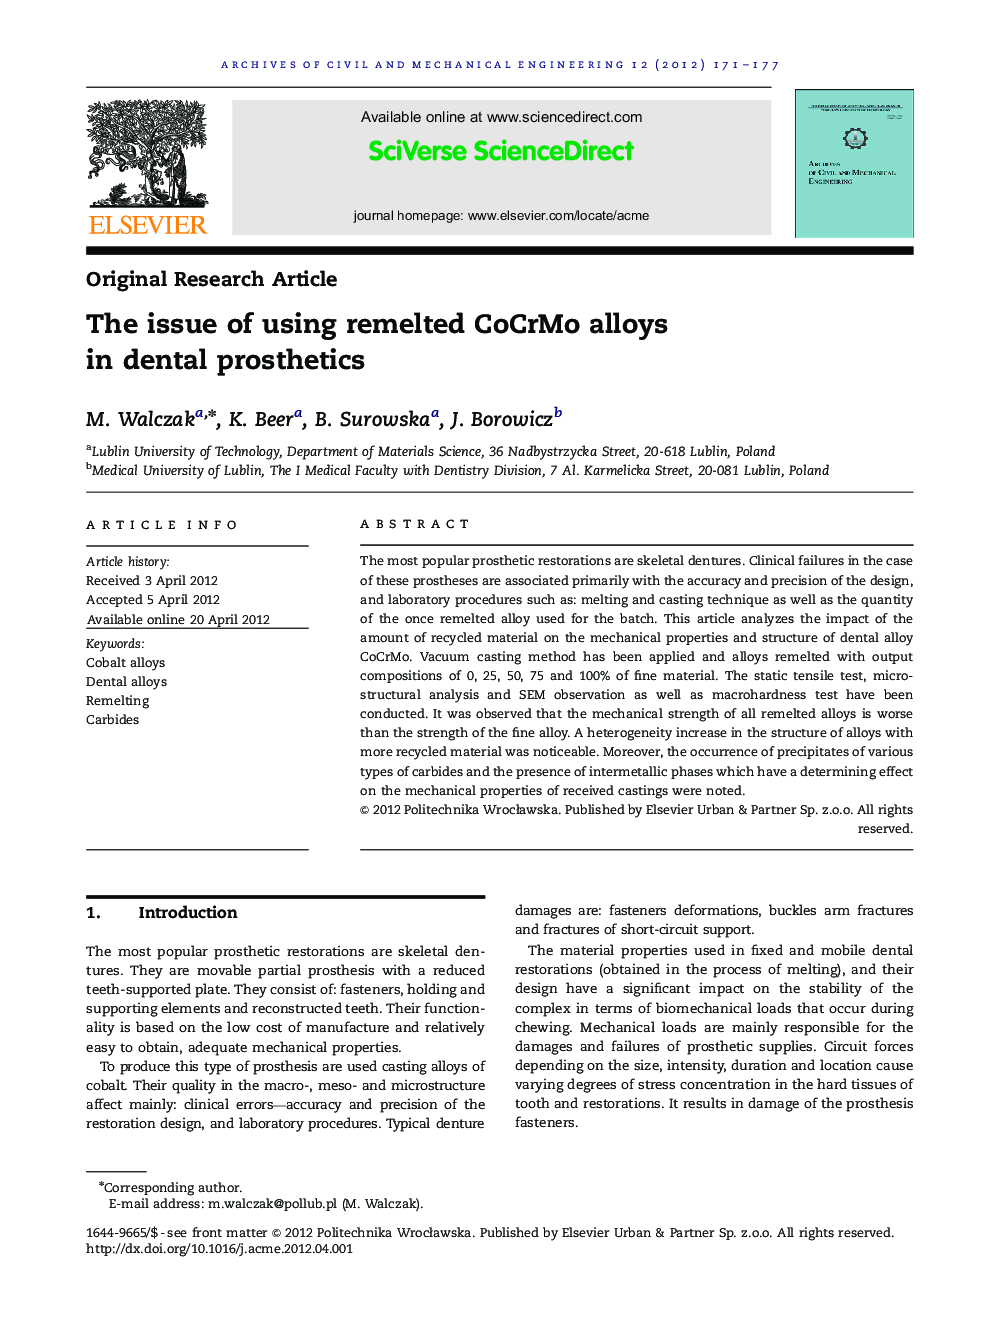 The issue of using remelted CoCrMo alloys in dental prosthetics